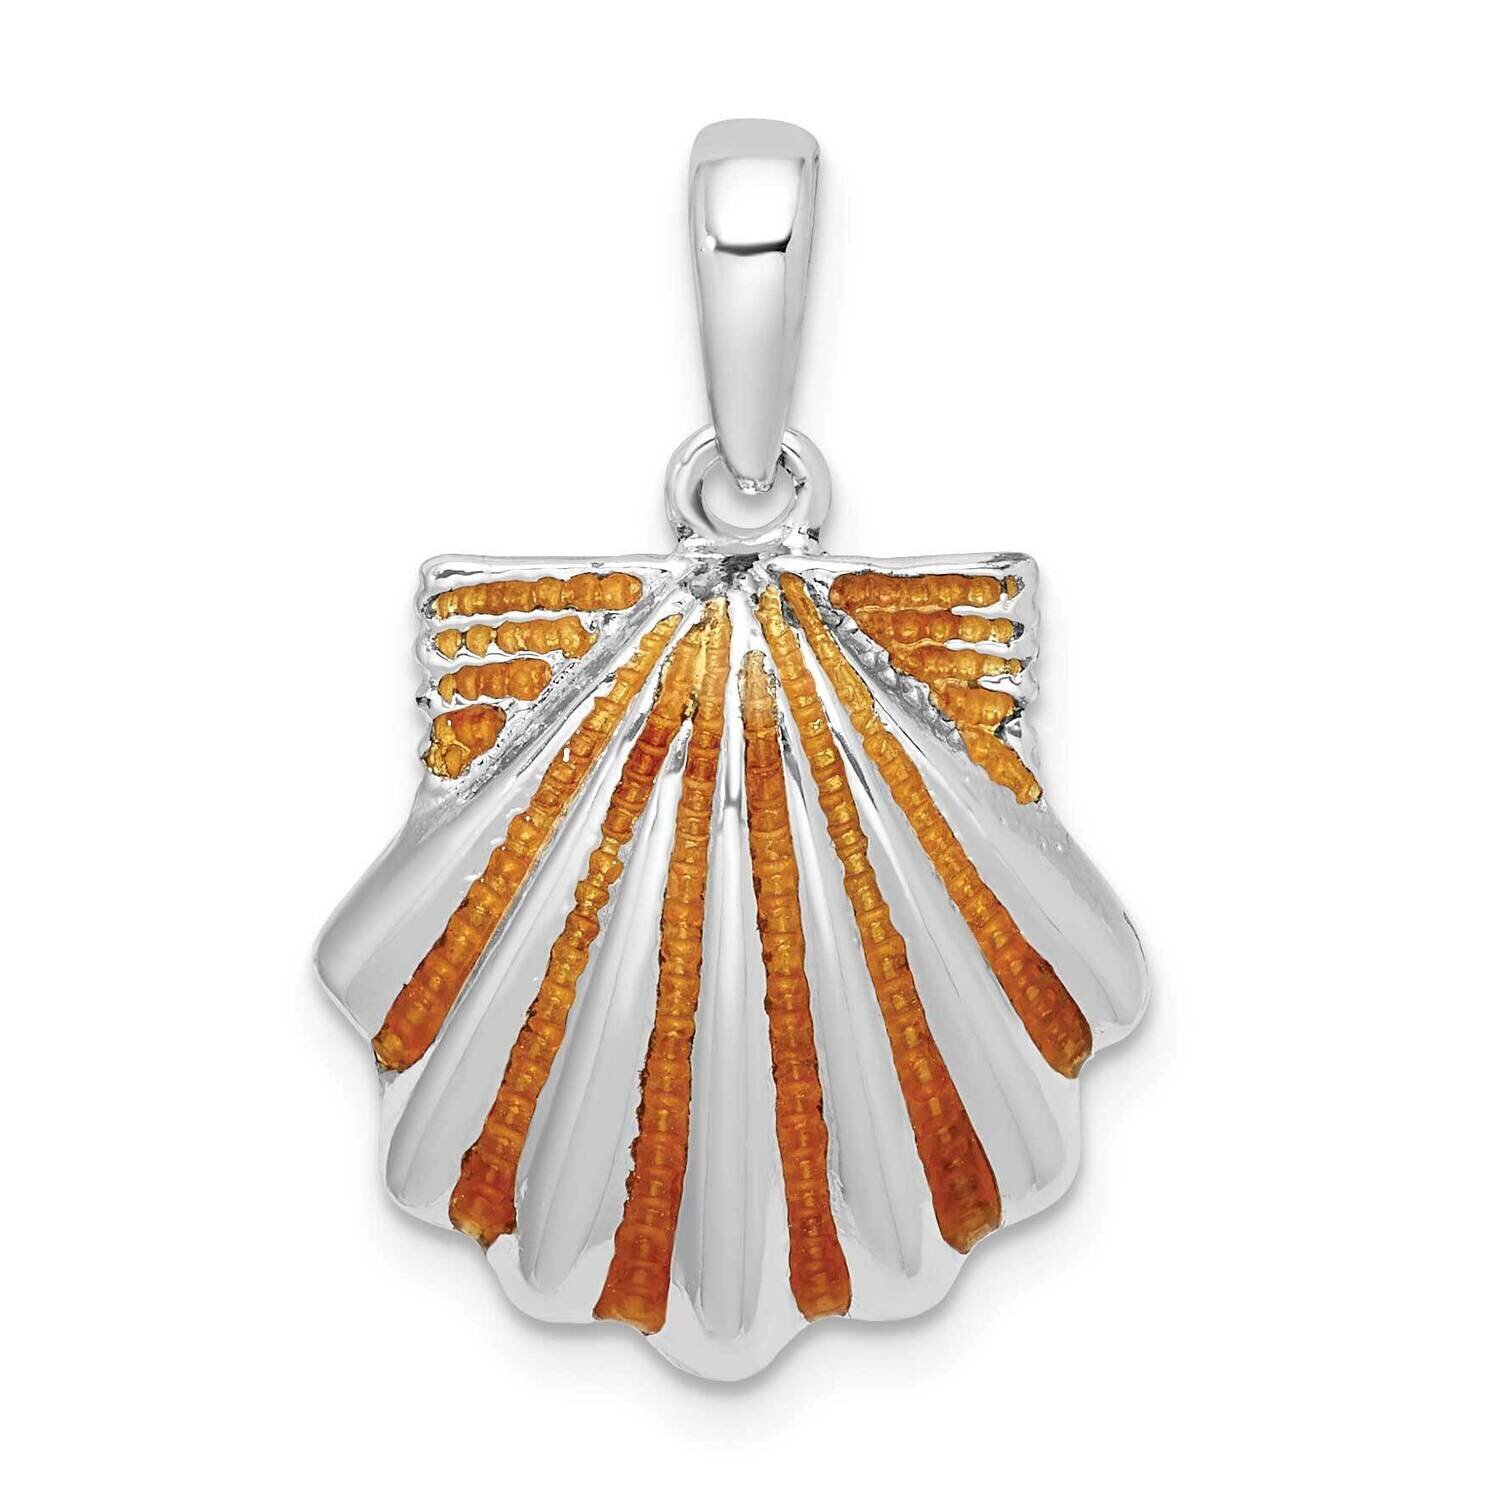 Enameled Yellow Scallop Shell Pendant Sterling Silver Polished QC10642